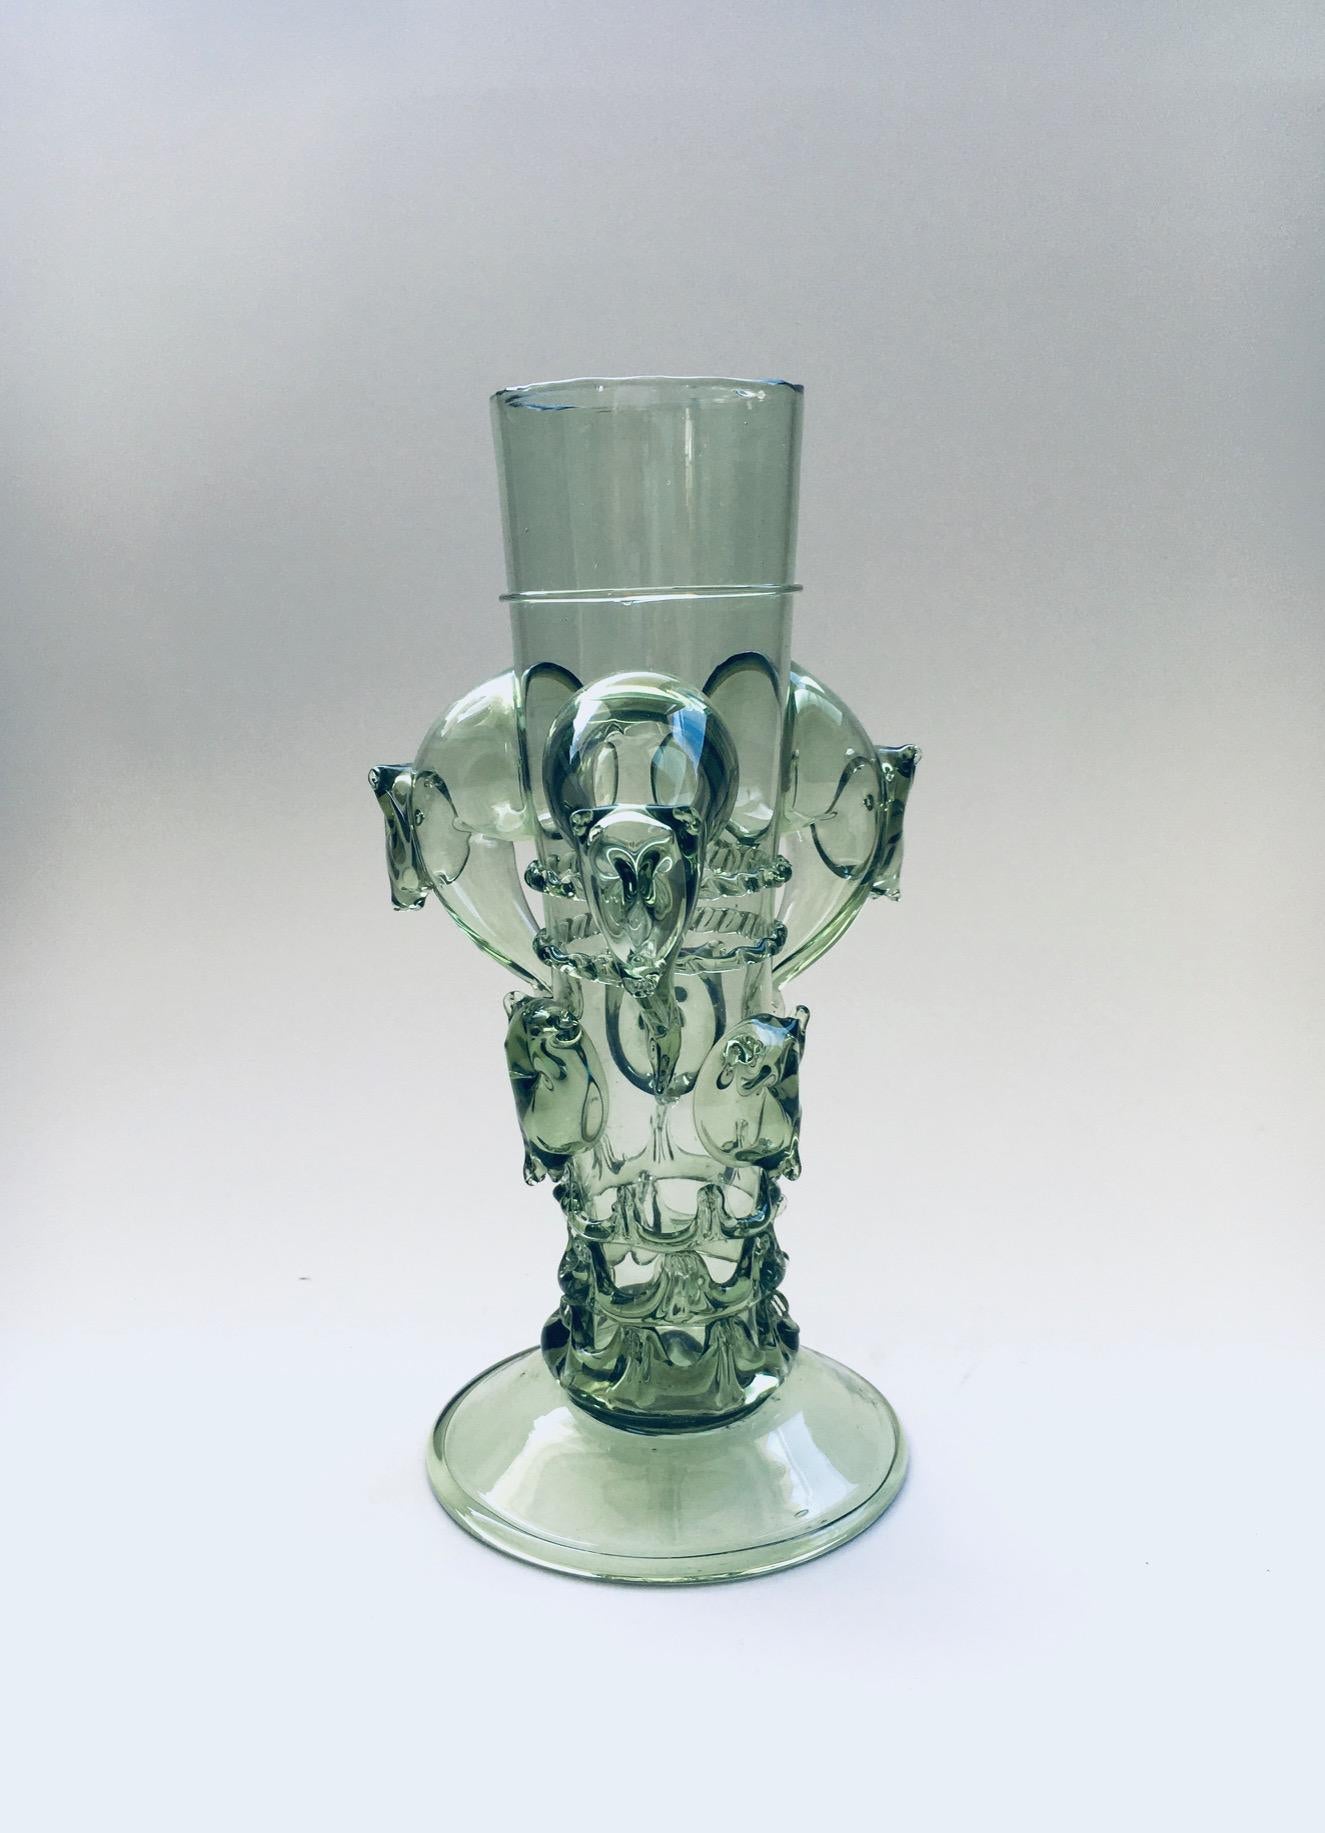 Original Early 20th Century Italian Design Intricate Art Glass Vase in pale green glass. Made in Italy, Murano region, early 20th century. Beautiful pale green glass, handblown, handmade art glass vase with bear figures surround. Master art